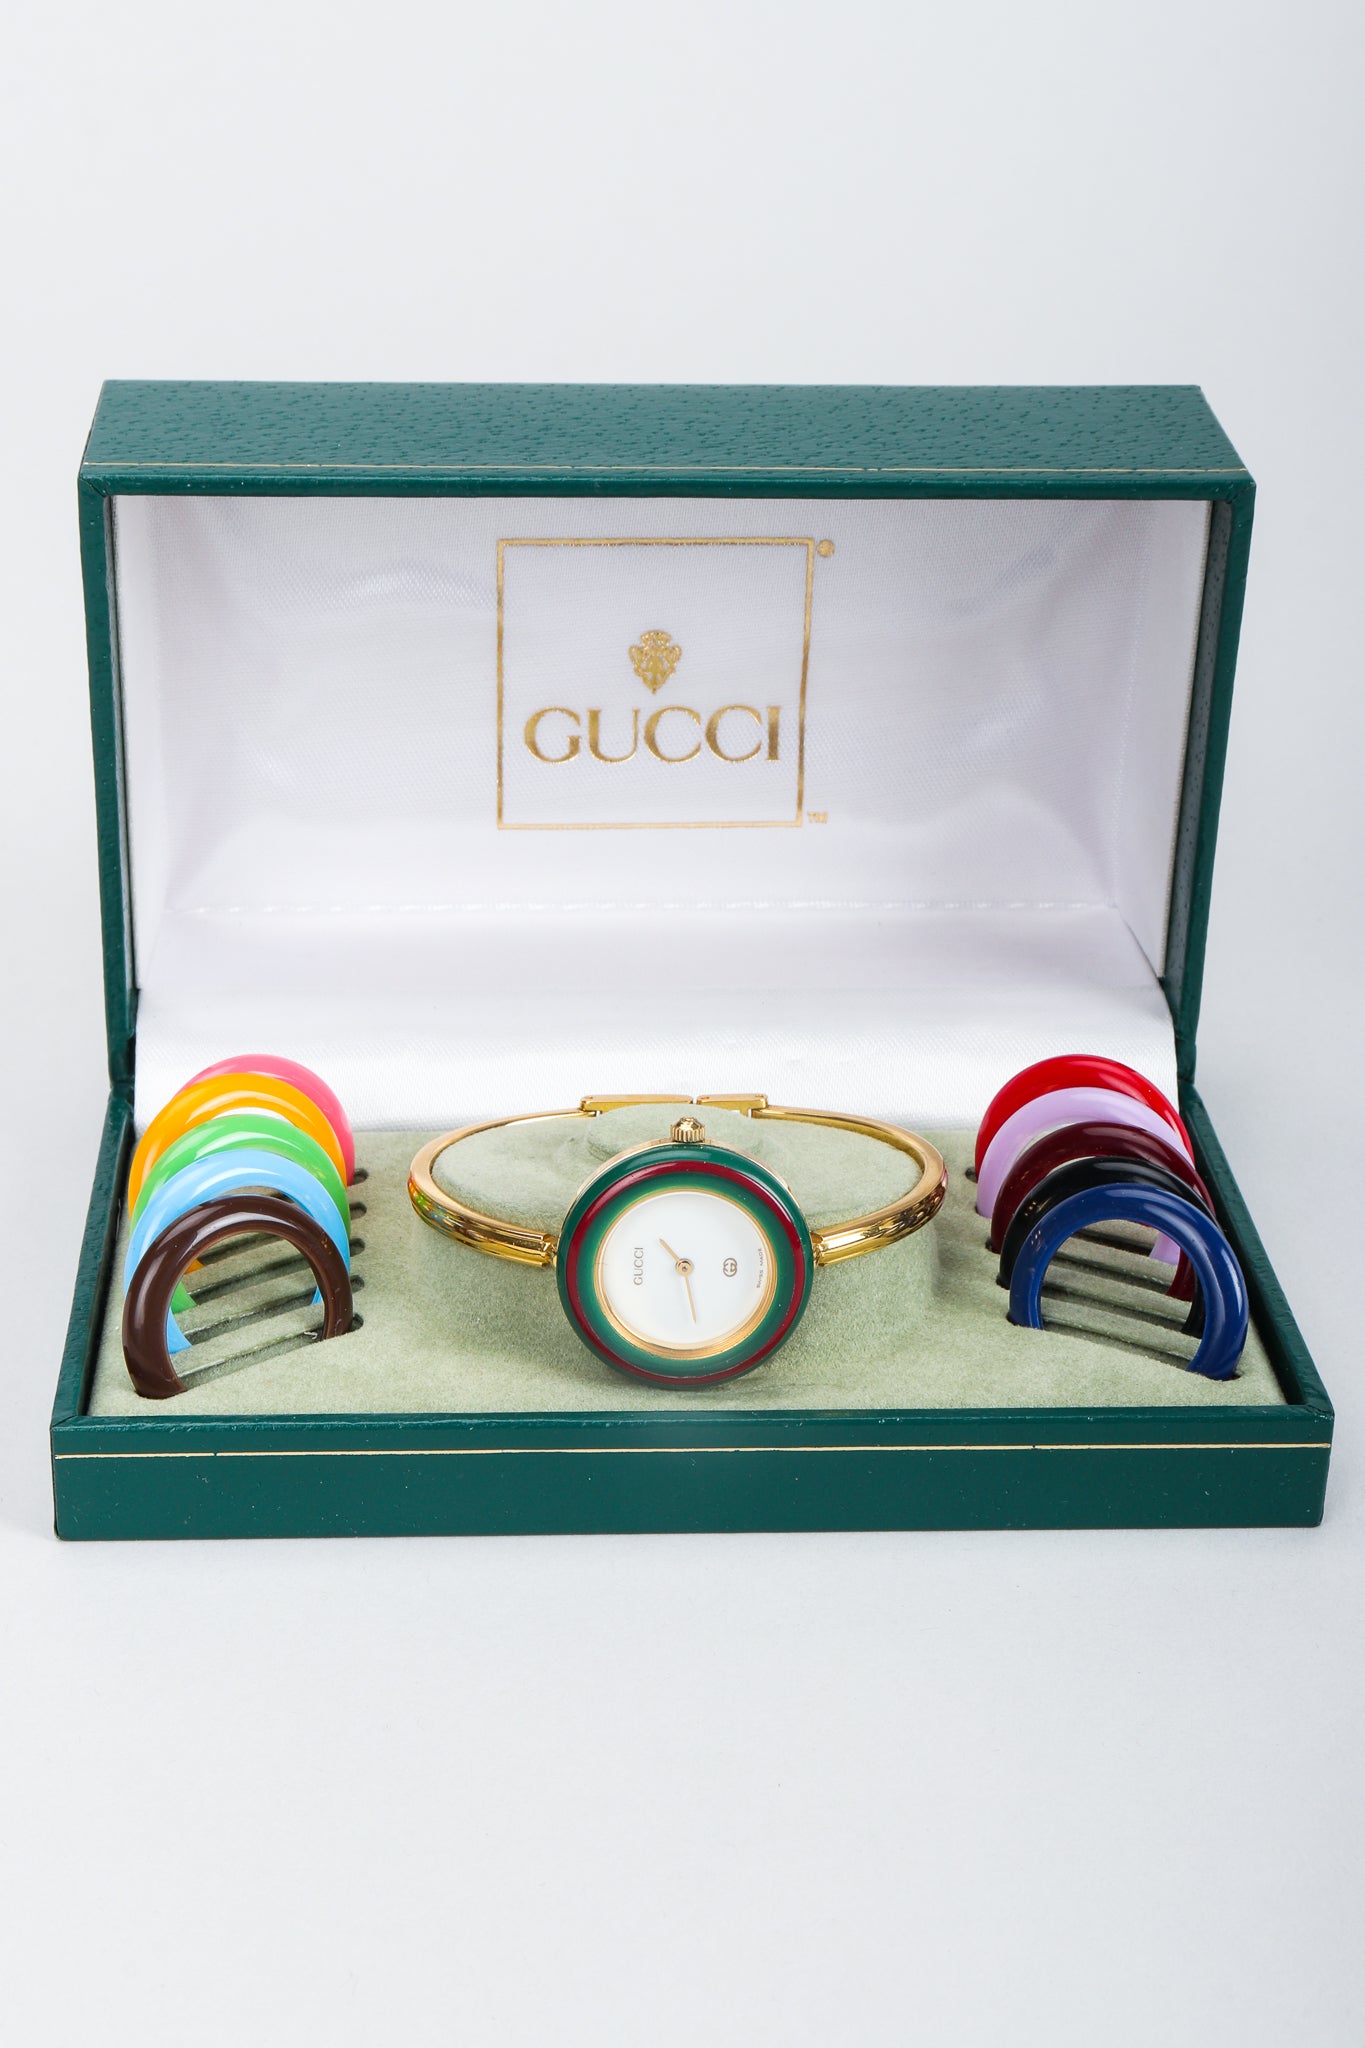 Vintage Gucci 1952 Boxed Bracelet Watch with Interchangeable Bezels in box at Recess Los Angeles